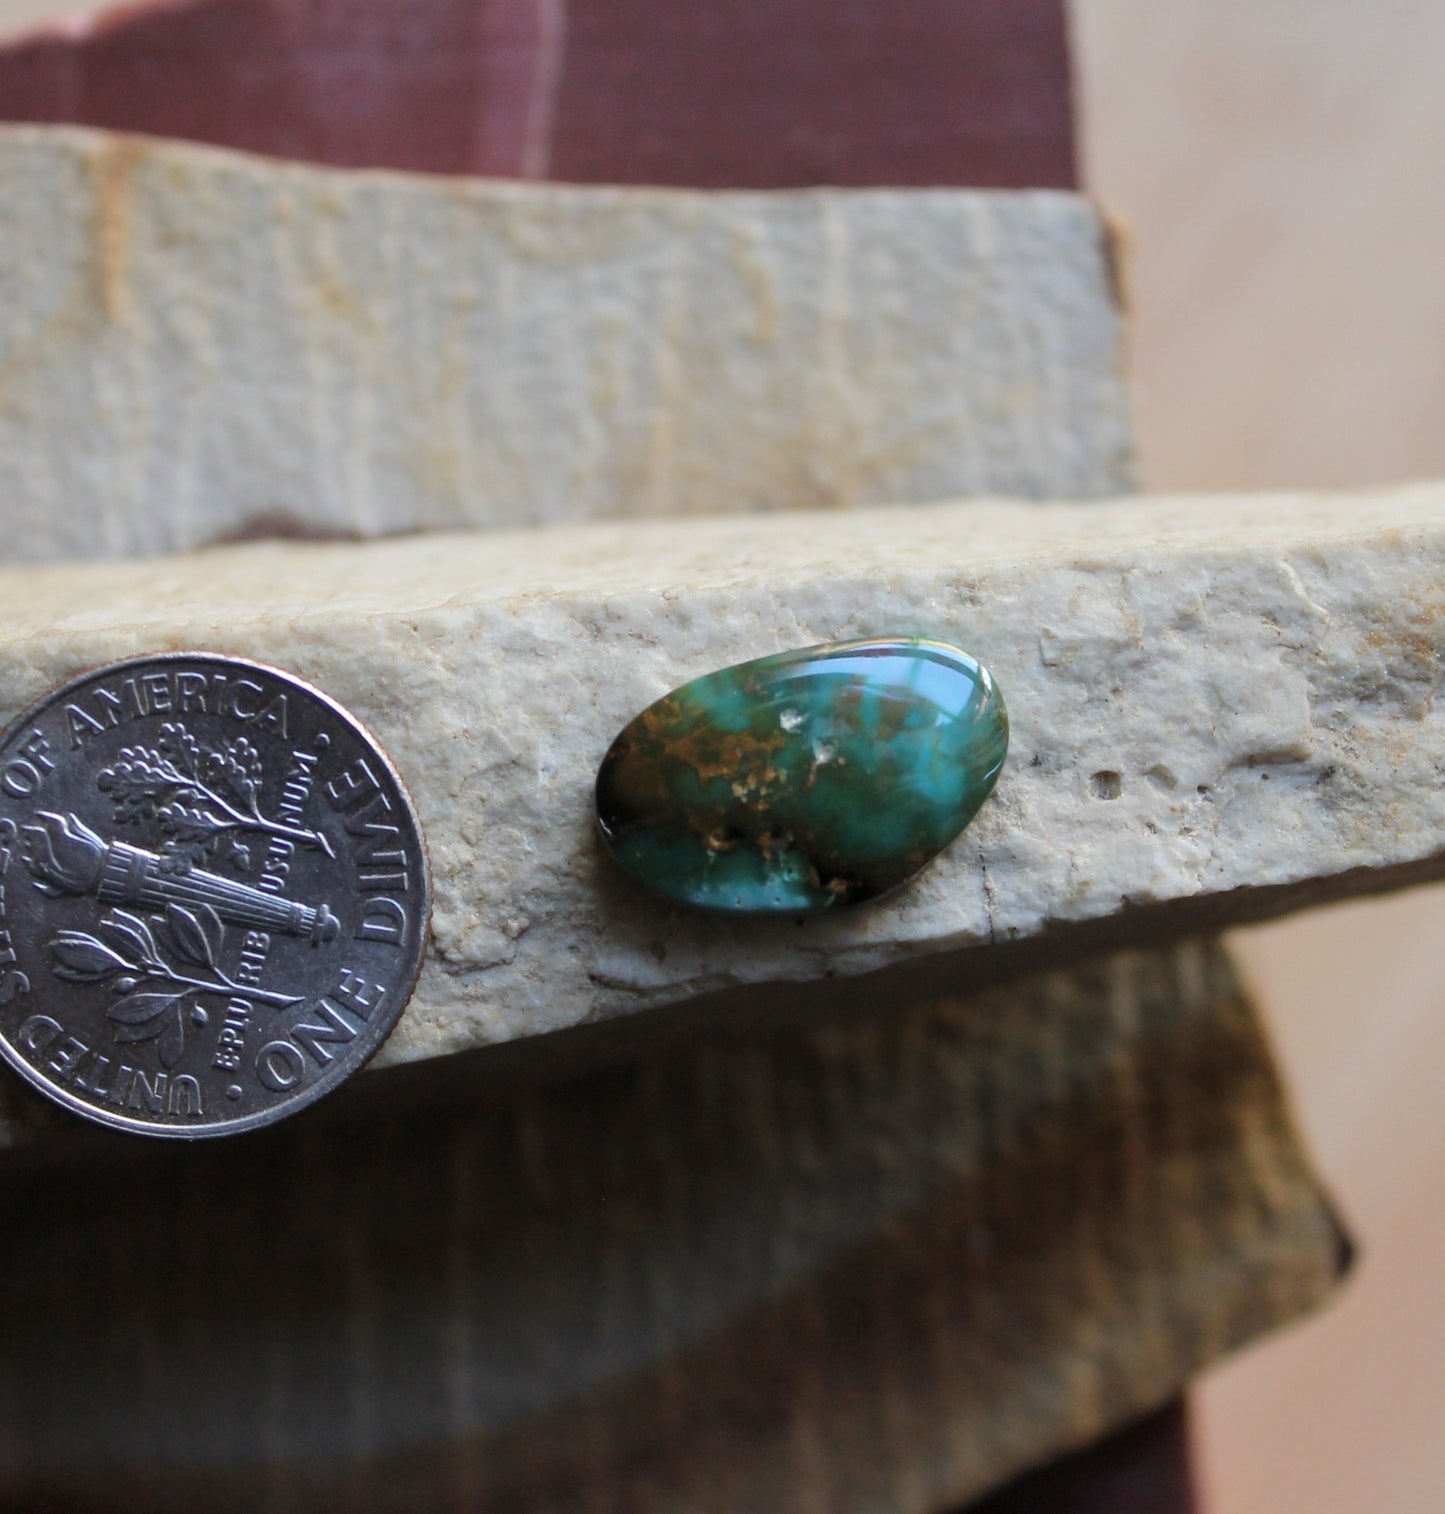 3 carat deep teal Stone Mountain Turquoise cabochon